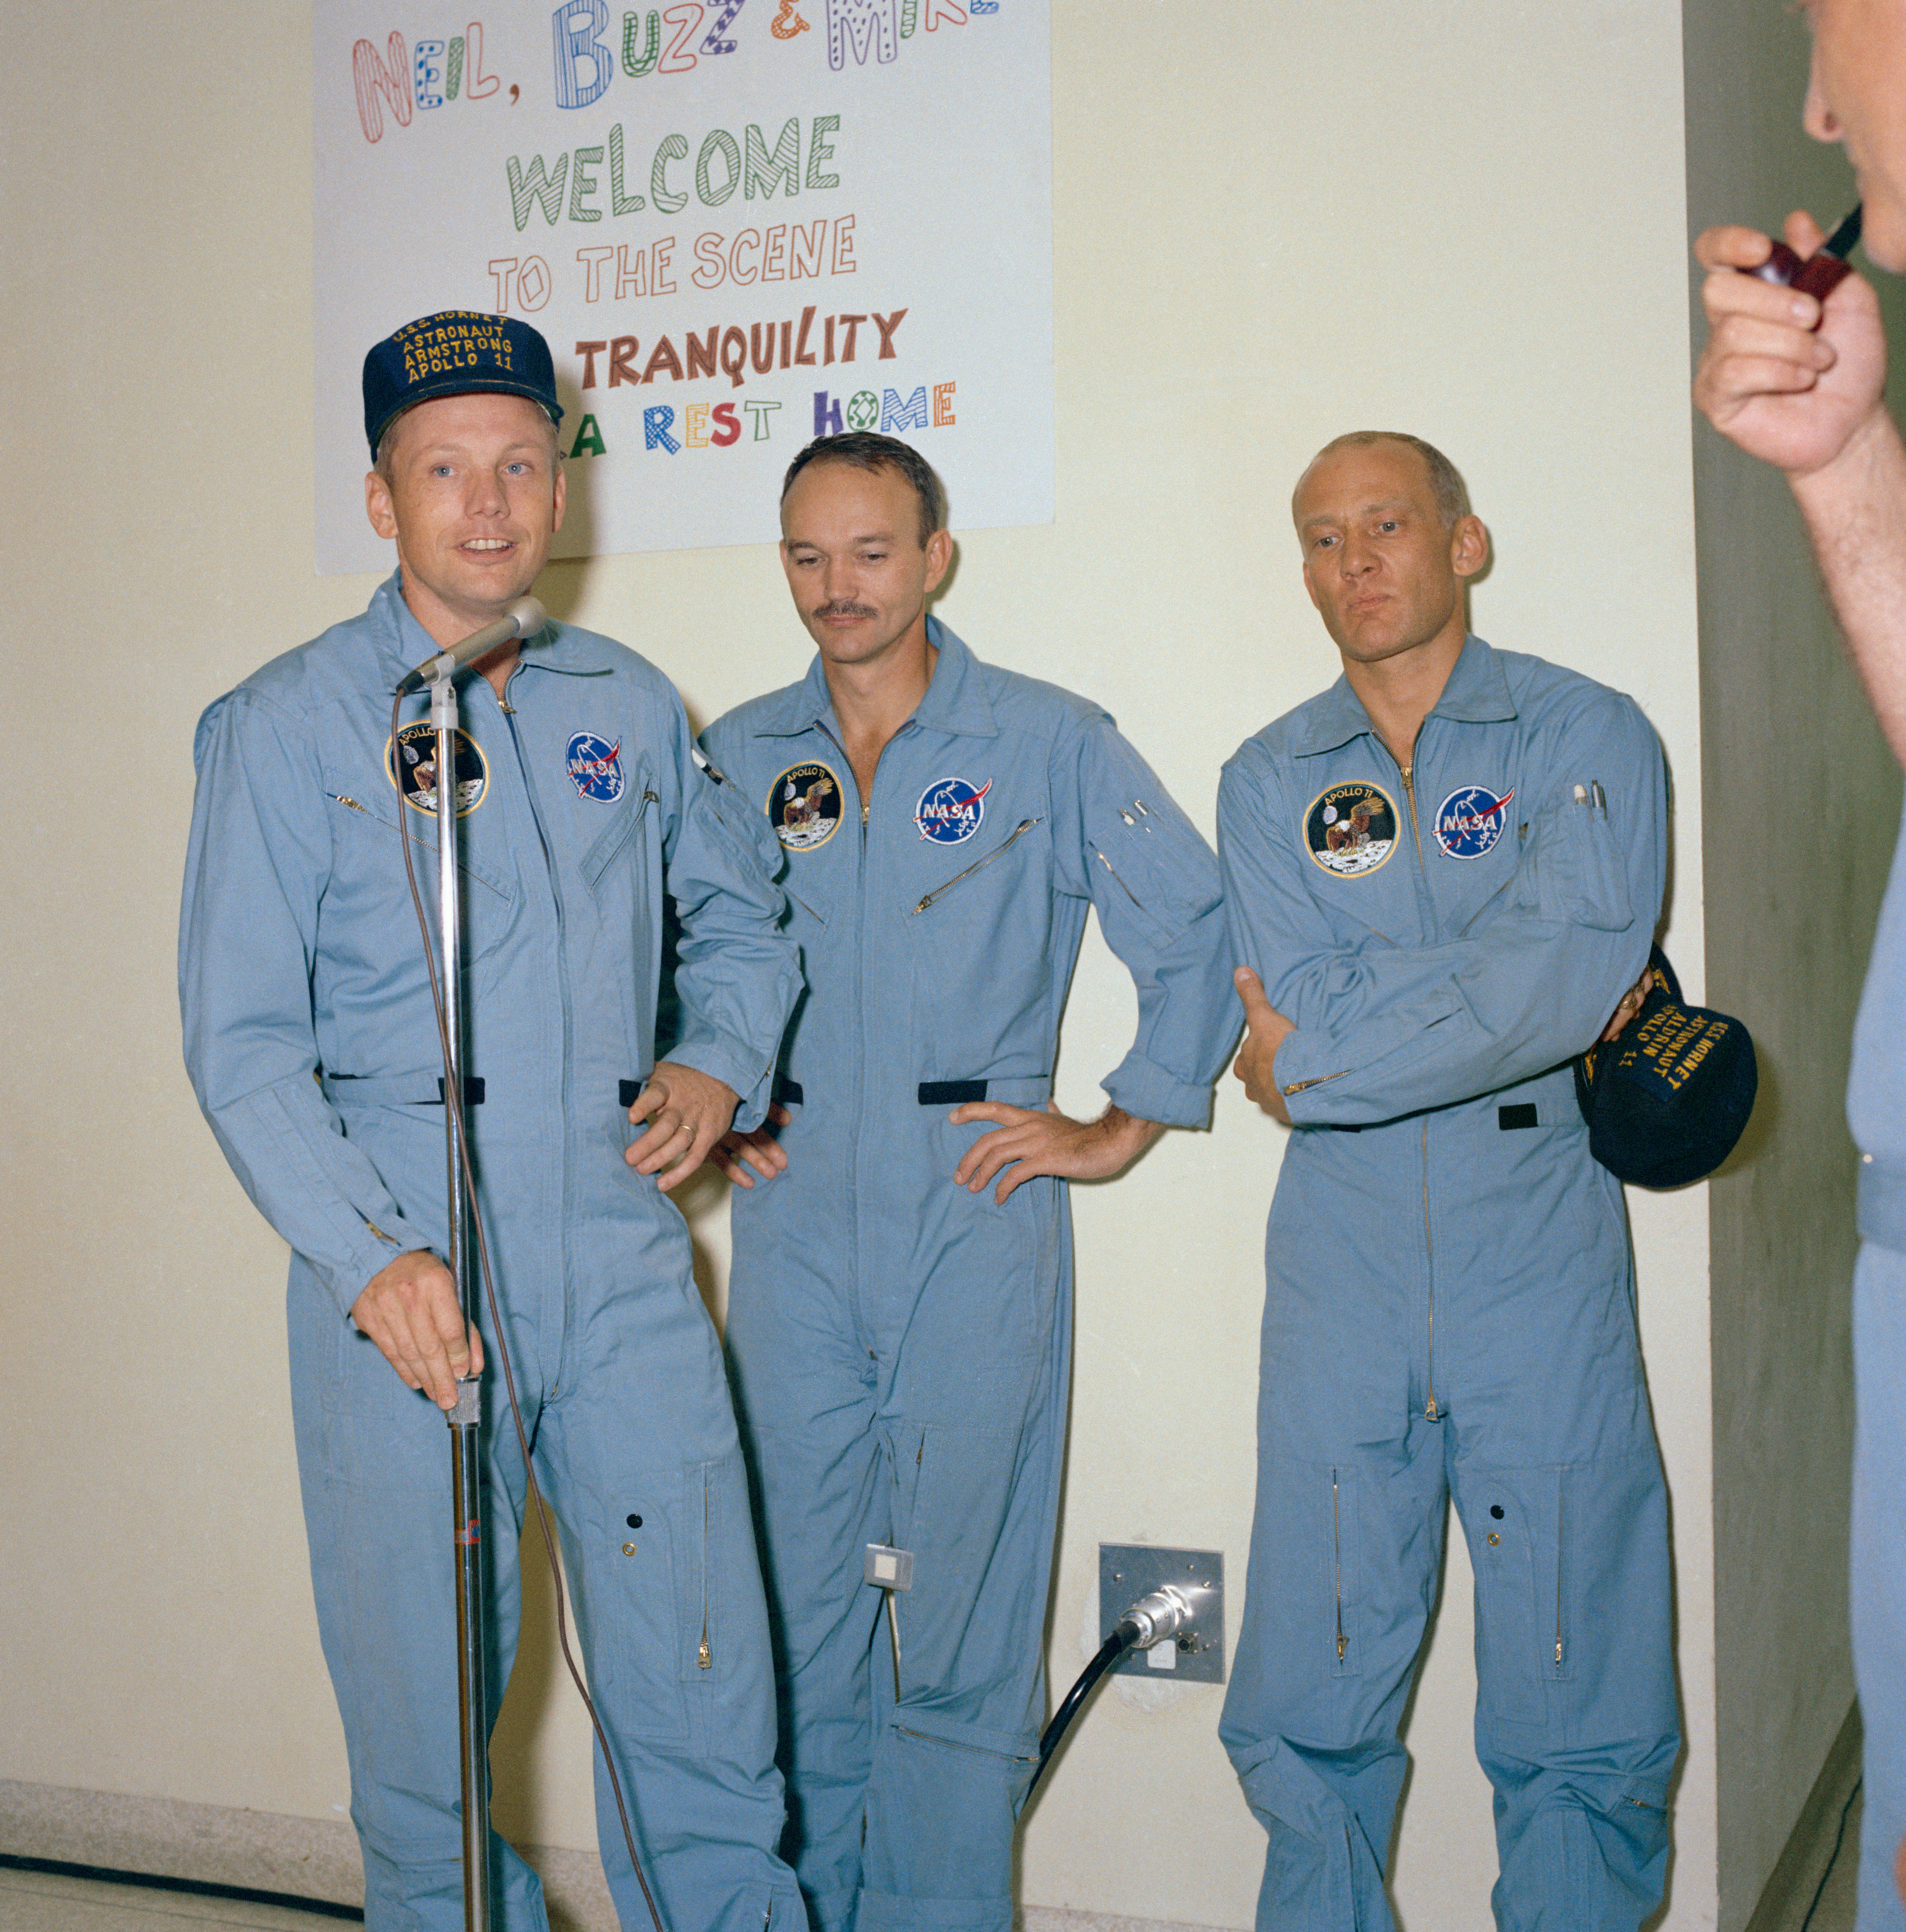 Neil, Mike, and Buzz address the workers inside the LRL